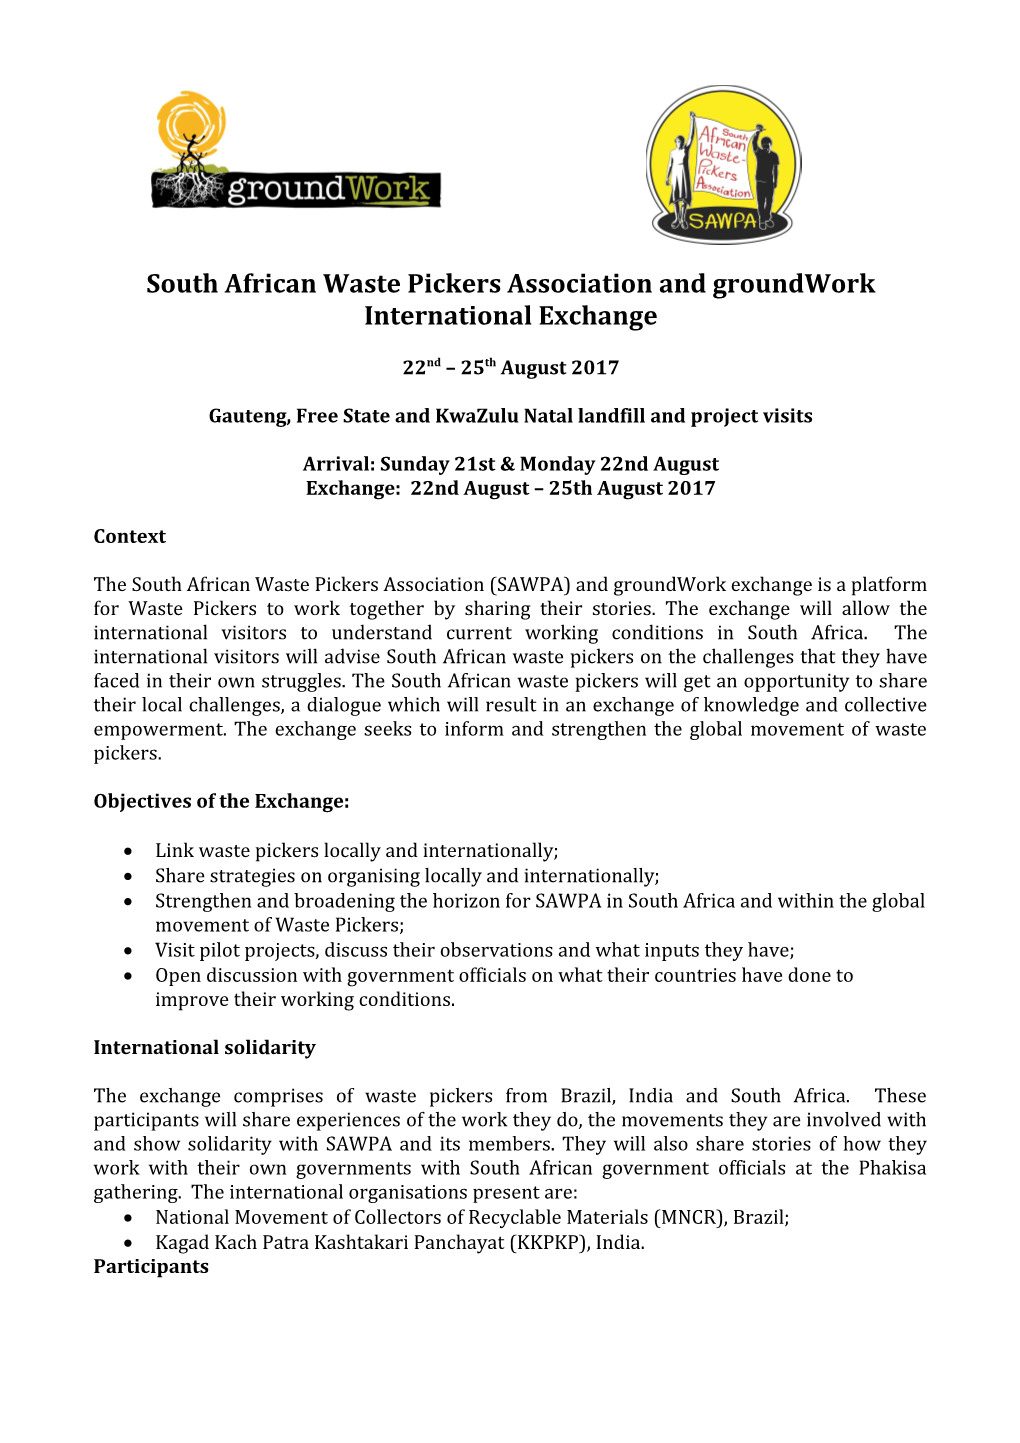 South African Waste Pickers Association and Groundwork International Exchange